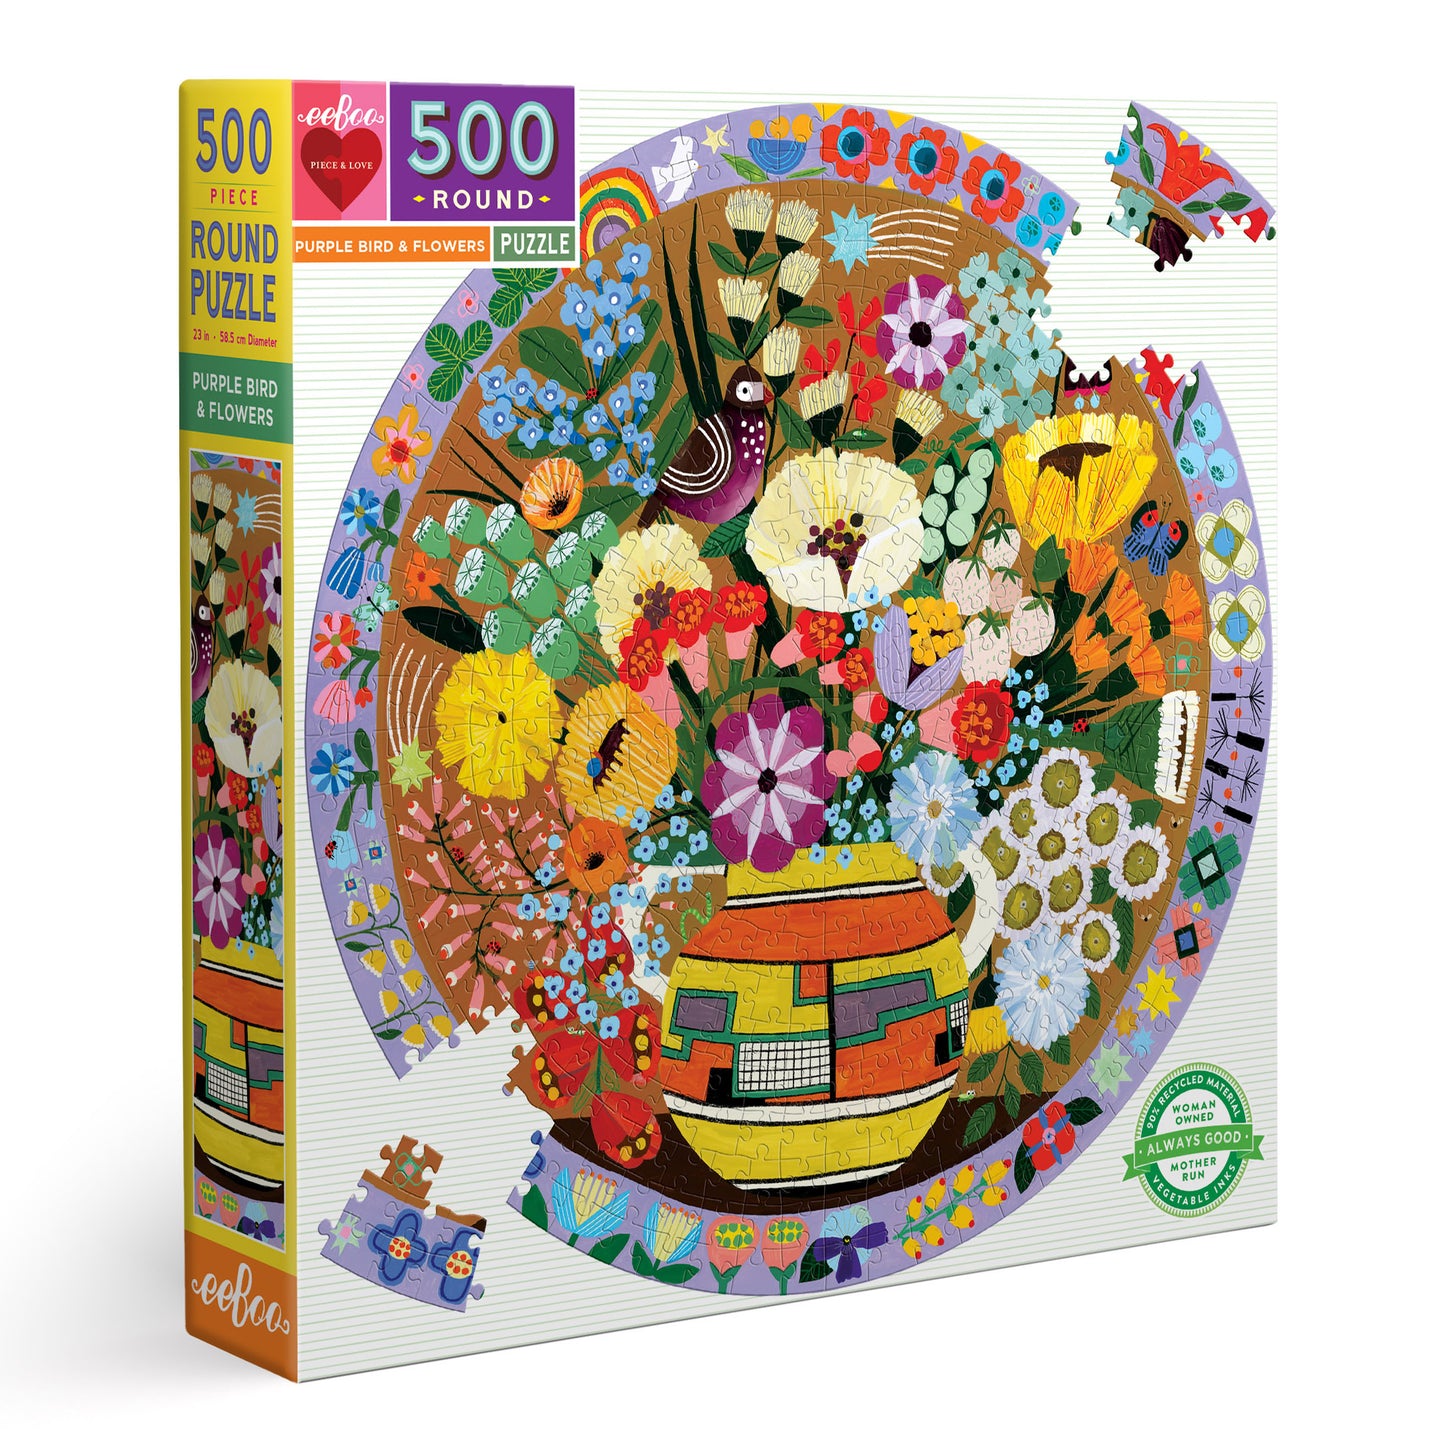 Purple Bird and Flowers Vase 500 Piece Jigsaw Puzzle | eeBoo Piece & Love Gifts for Teens & Adults